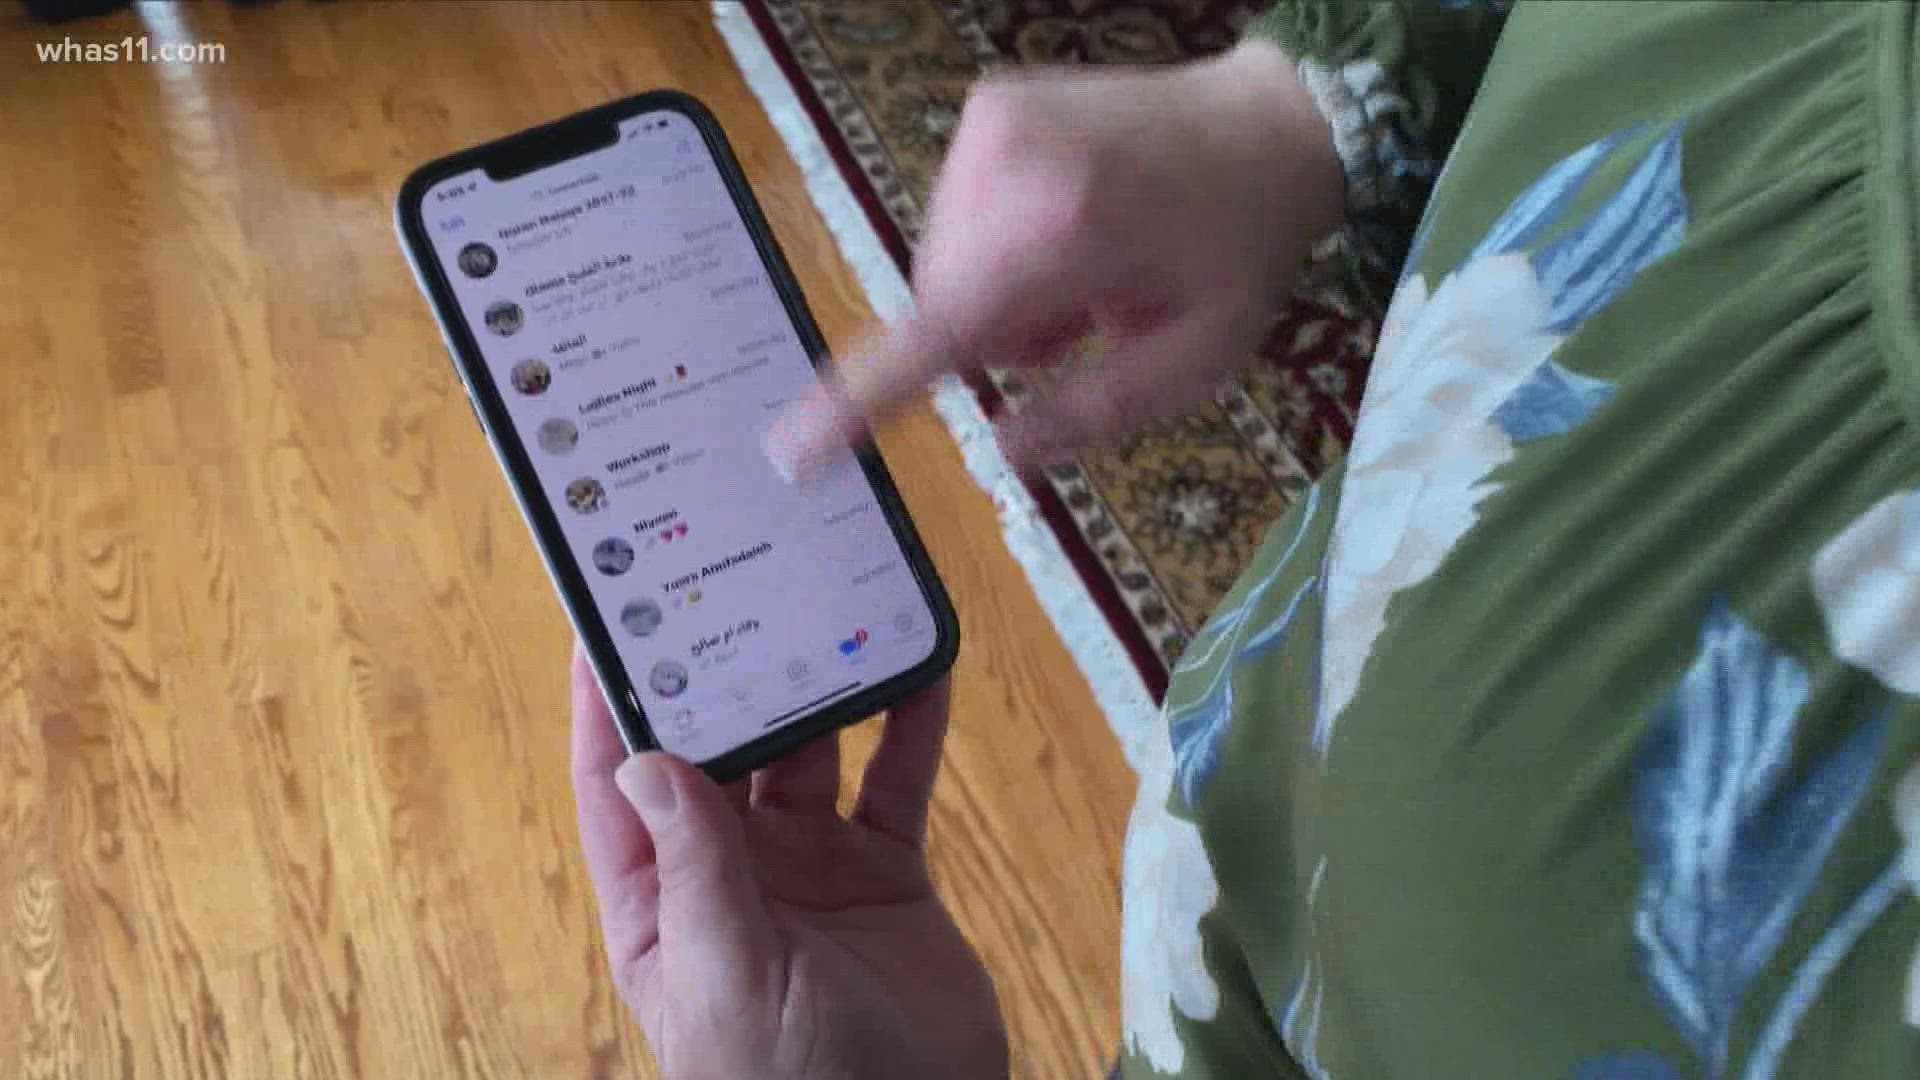 Having no access to Facebook, instagram, and Whatsapp was a nuisance to many. For some people here in Louisville, the 7-hour outage was a lifeline, cut.